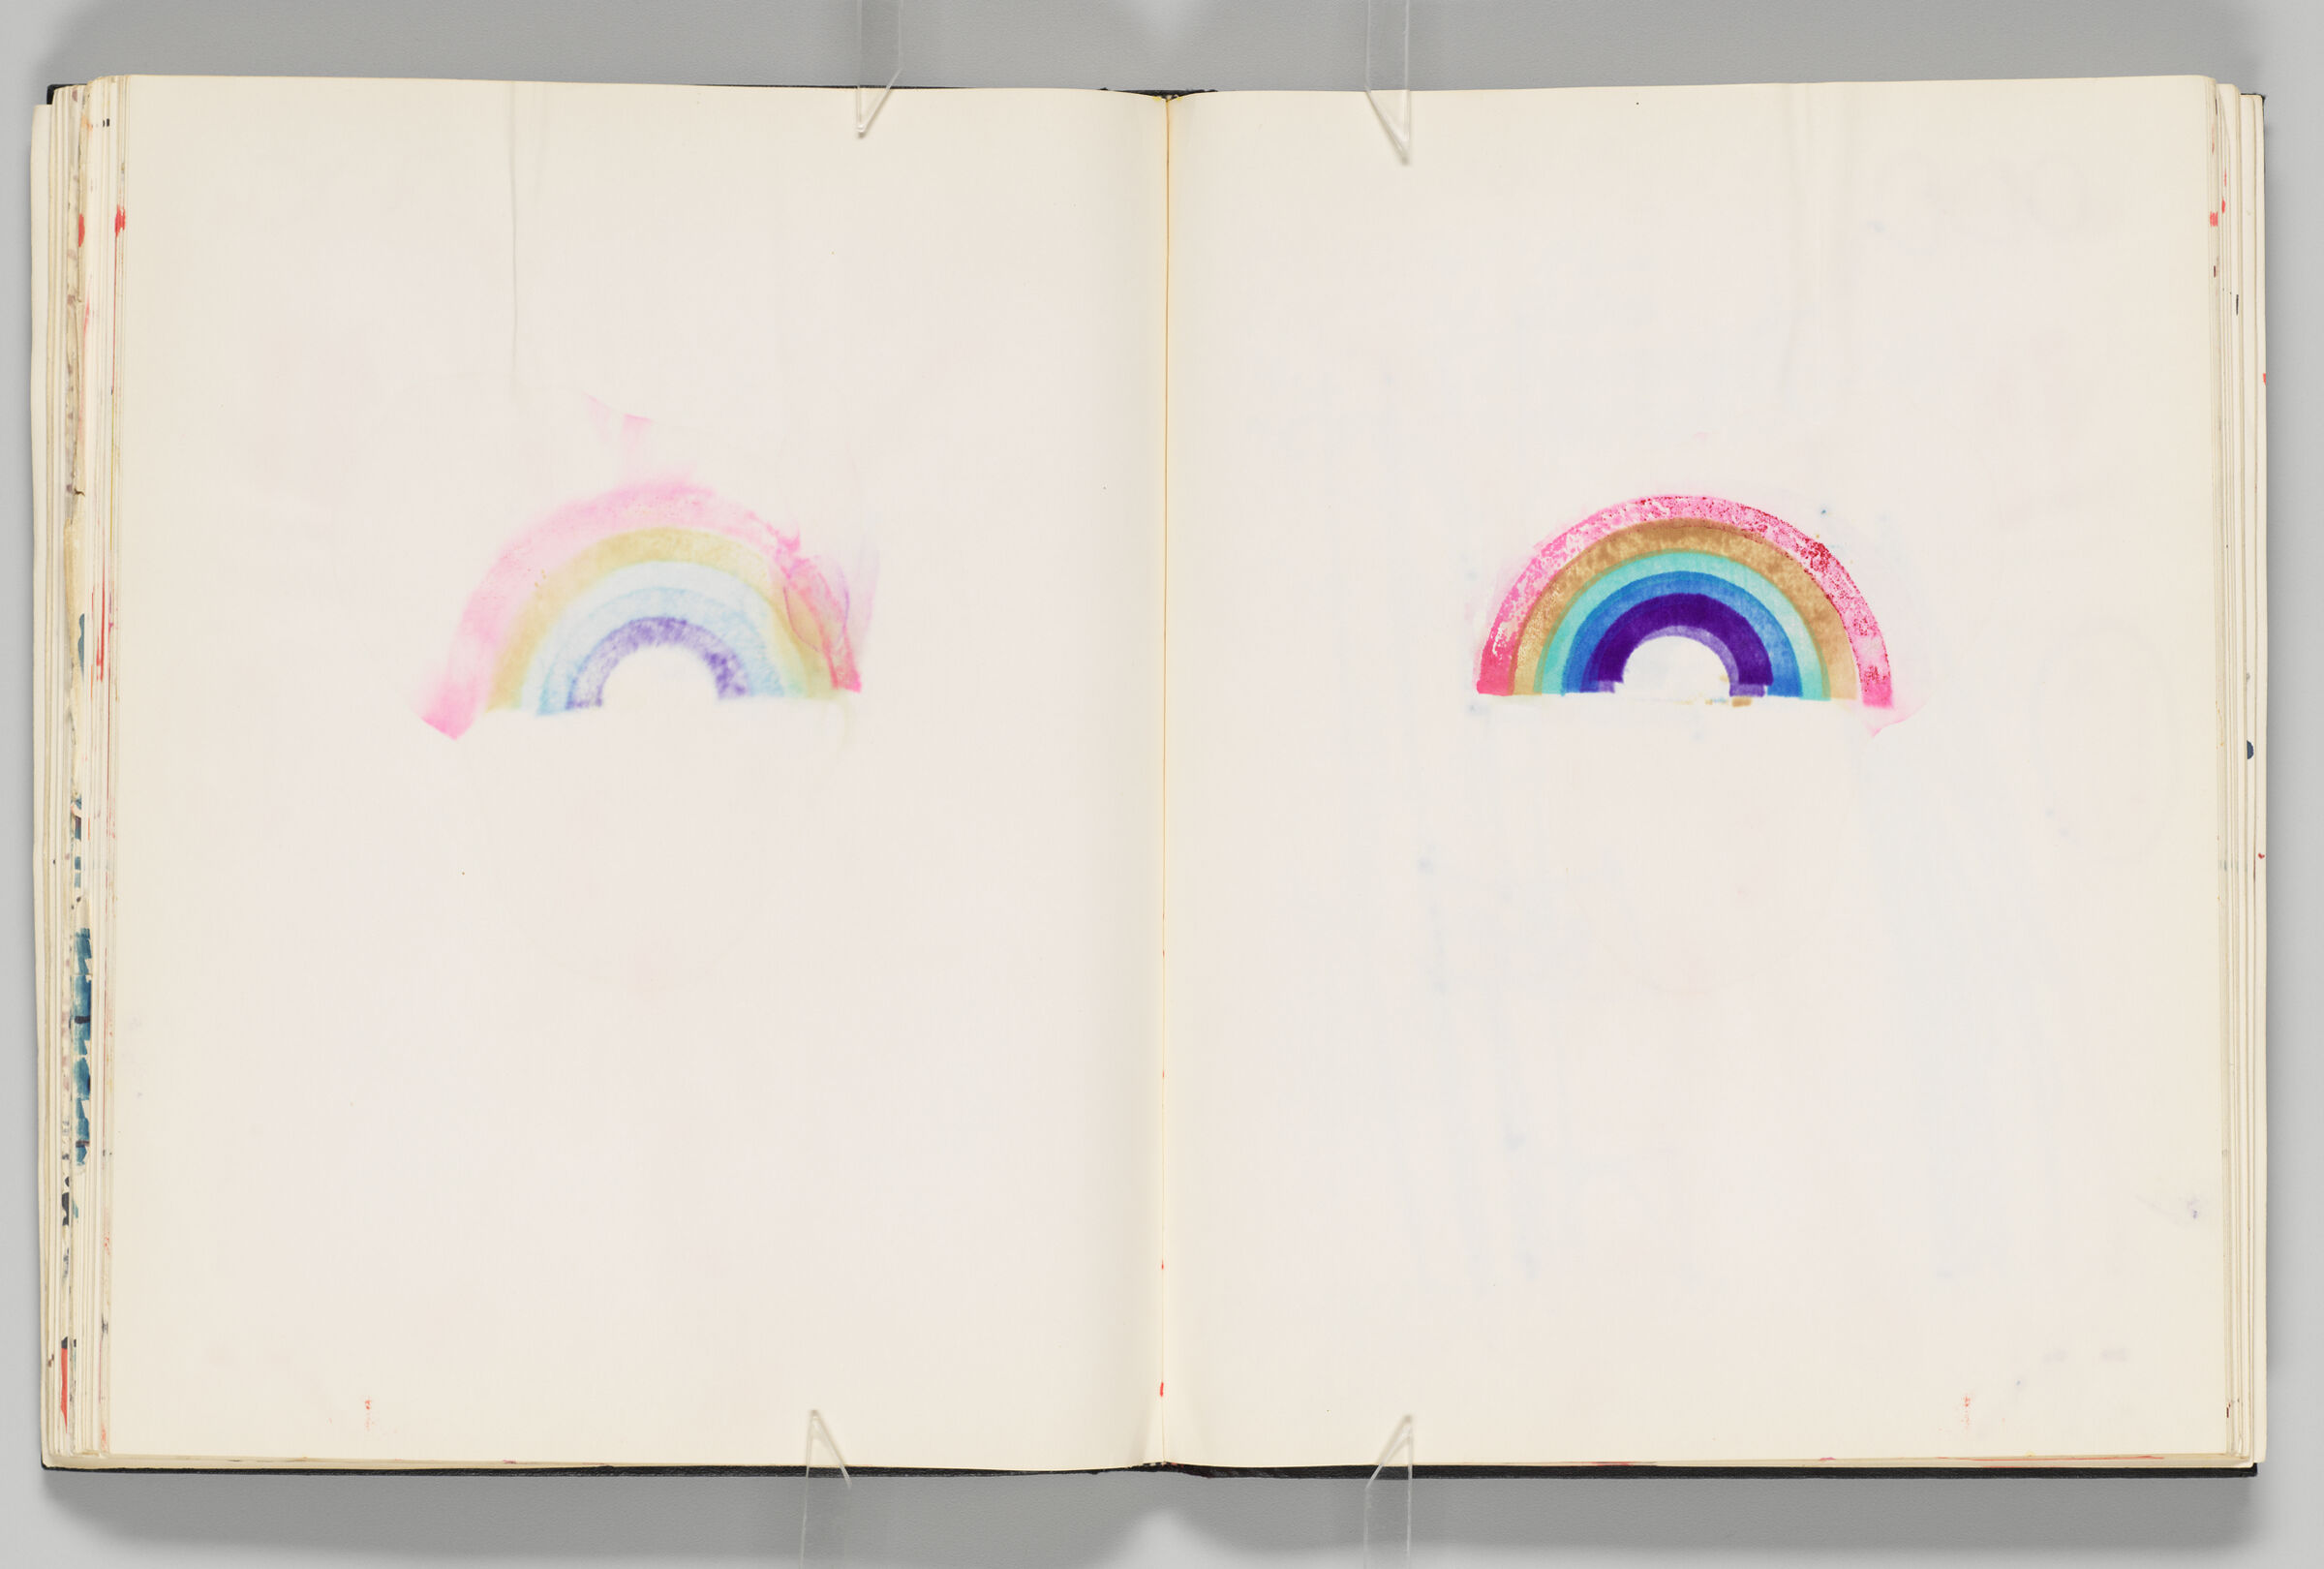 Untitled (Color Transfer Of Rainbow Stamp Impression Manipulated With Water, Left Page); Untitled (Rainbow Stamp Impression Manipulated With Water, Right Page)